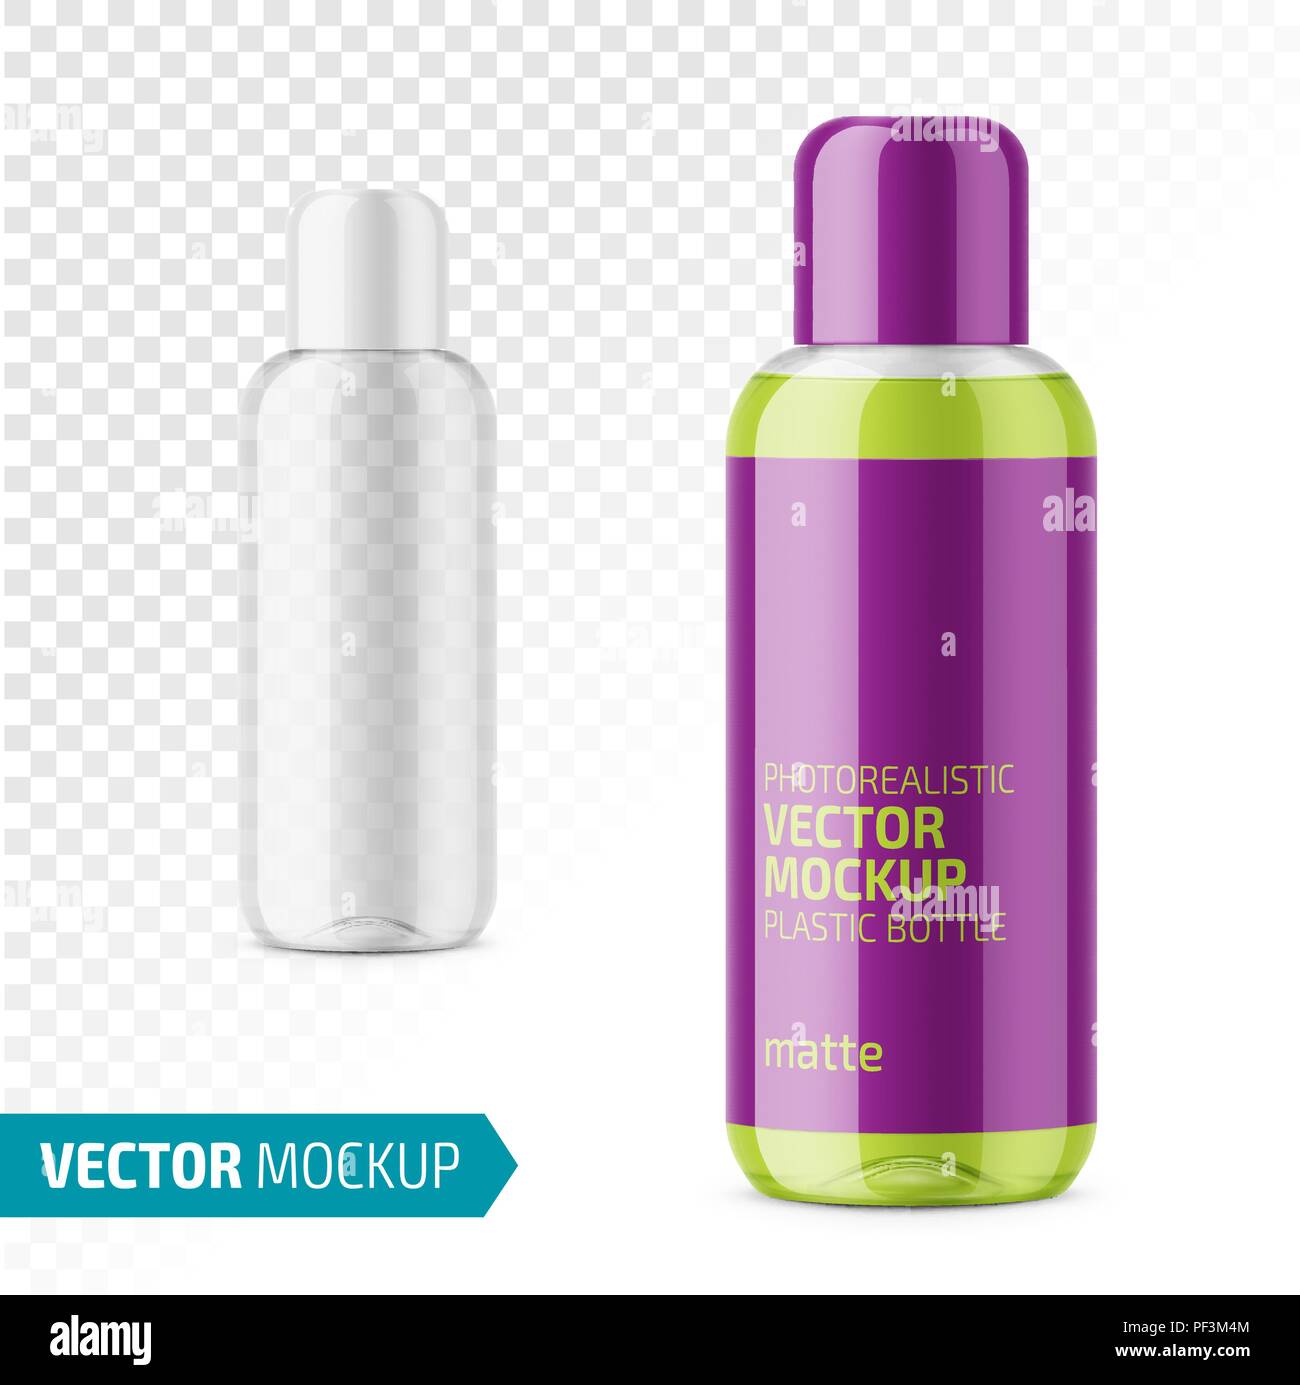 Download Transparent Plastic Cosmetic Bottle With Label 200 Ml Cosmo Round Style For Lotion Body Milk Shampoo Etc Photorealistic Packaging Mockup Stock Vector Image Art Alamy